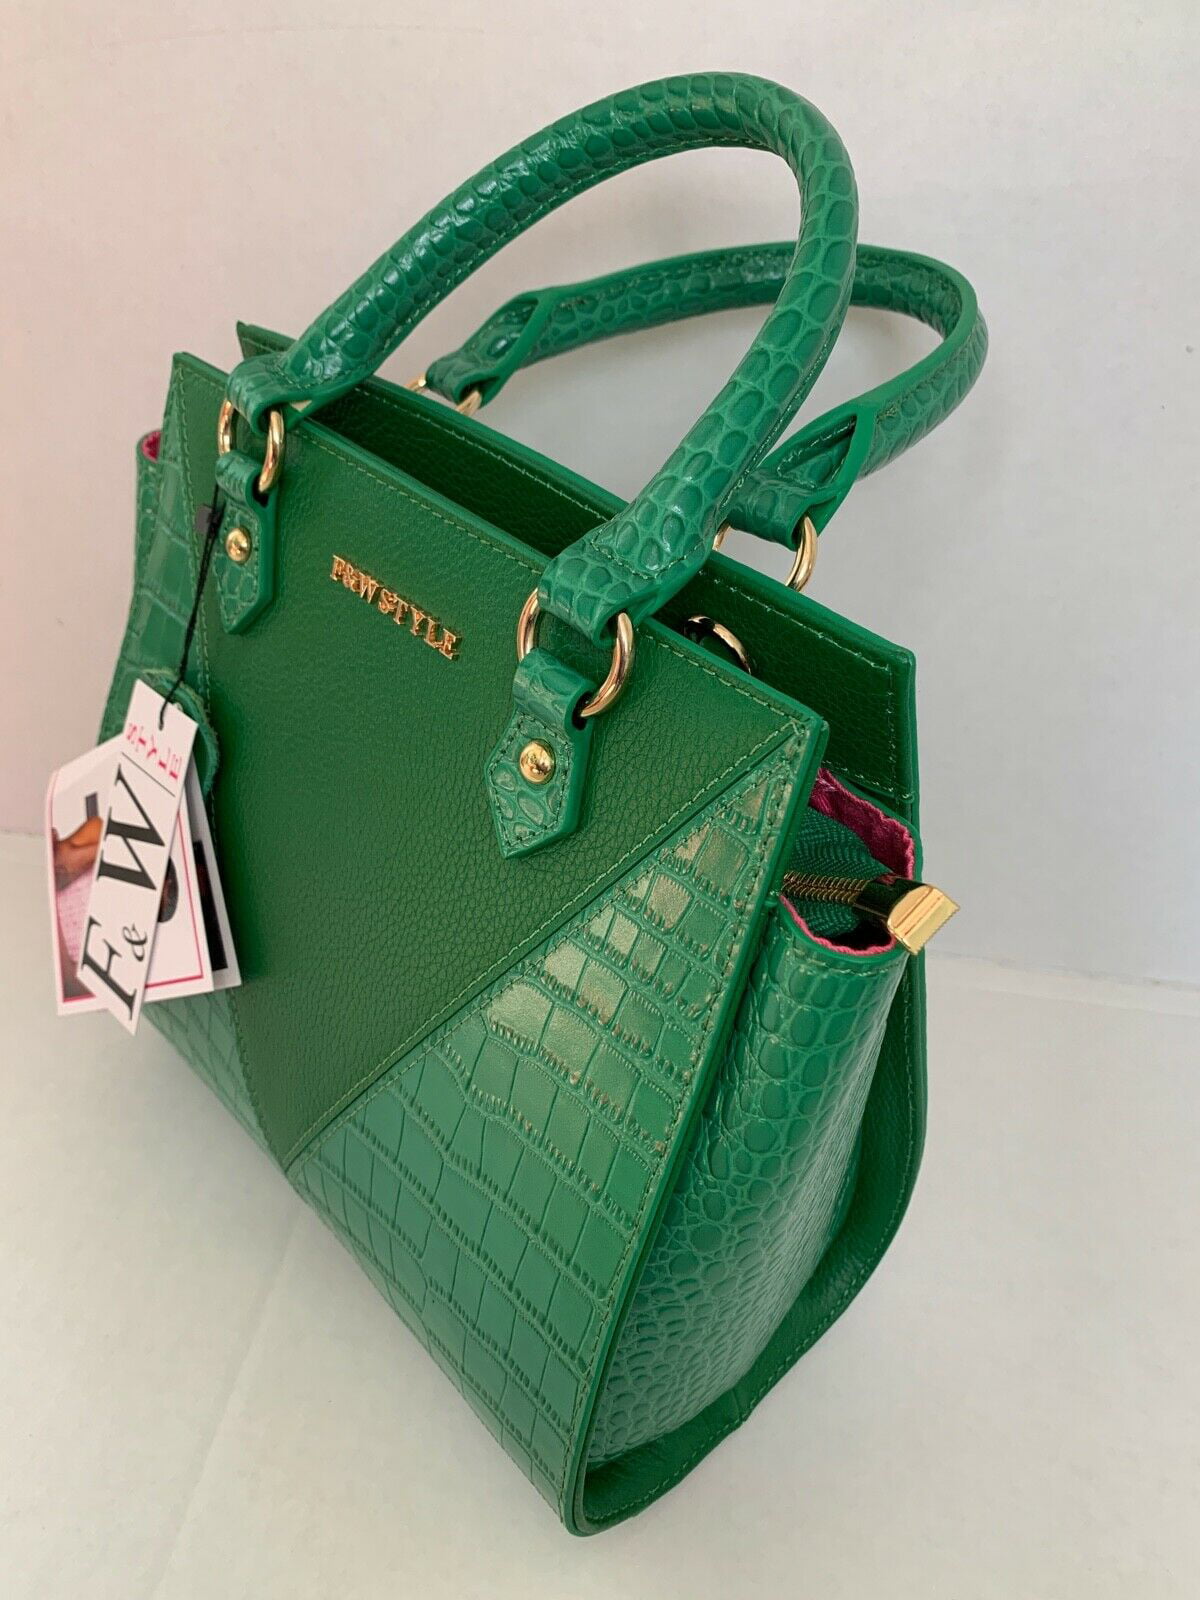 F&W Style Bella croc embossed leather Handbag Color Green Small New with  tag 